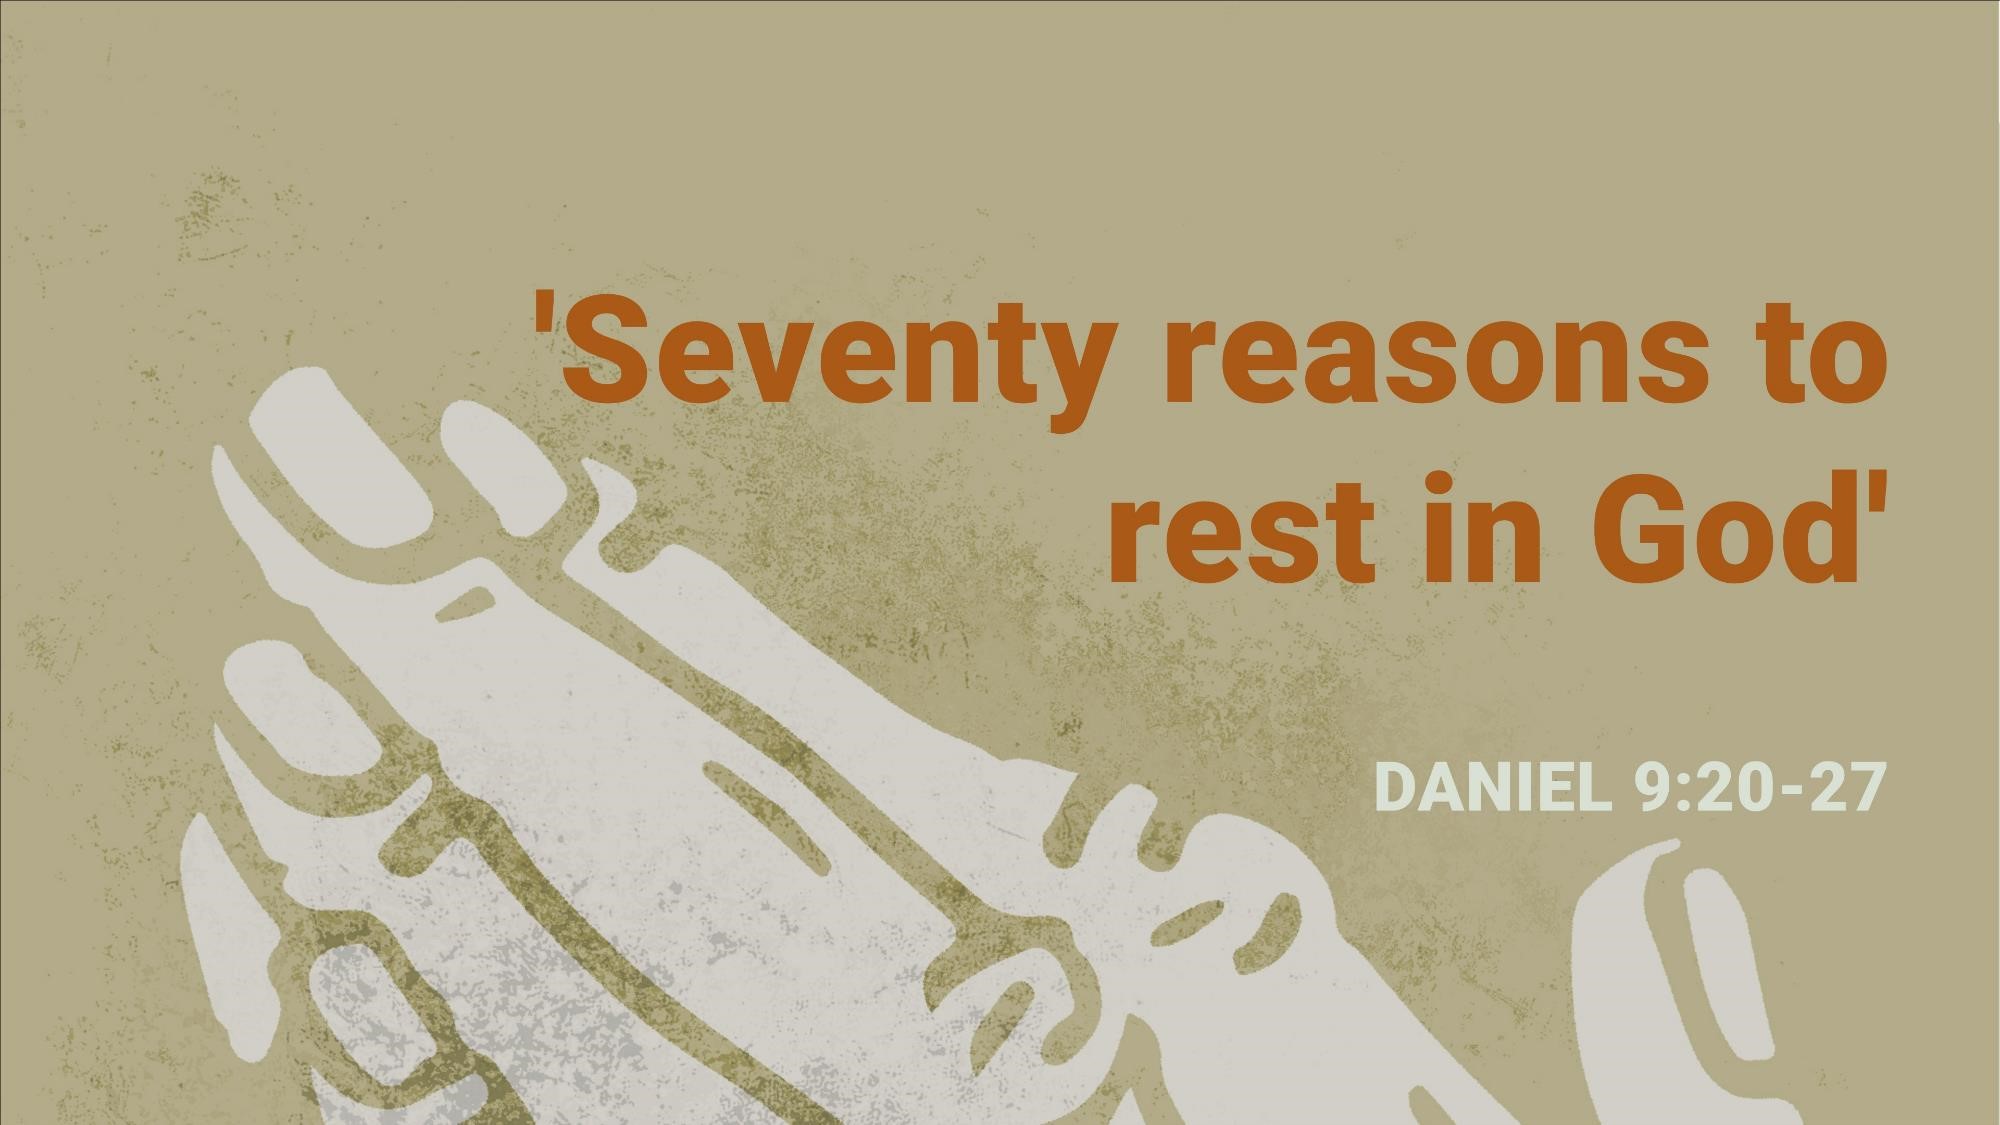 Seventy reasons to rest in God